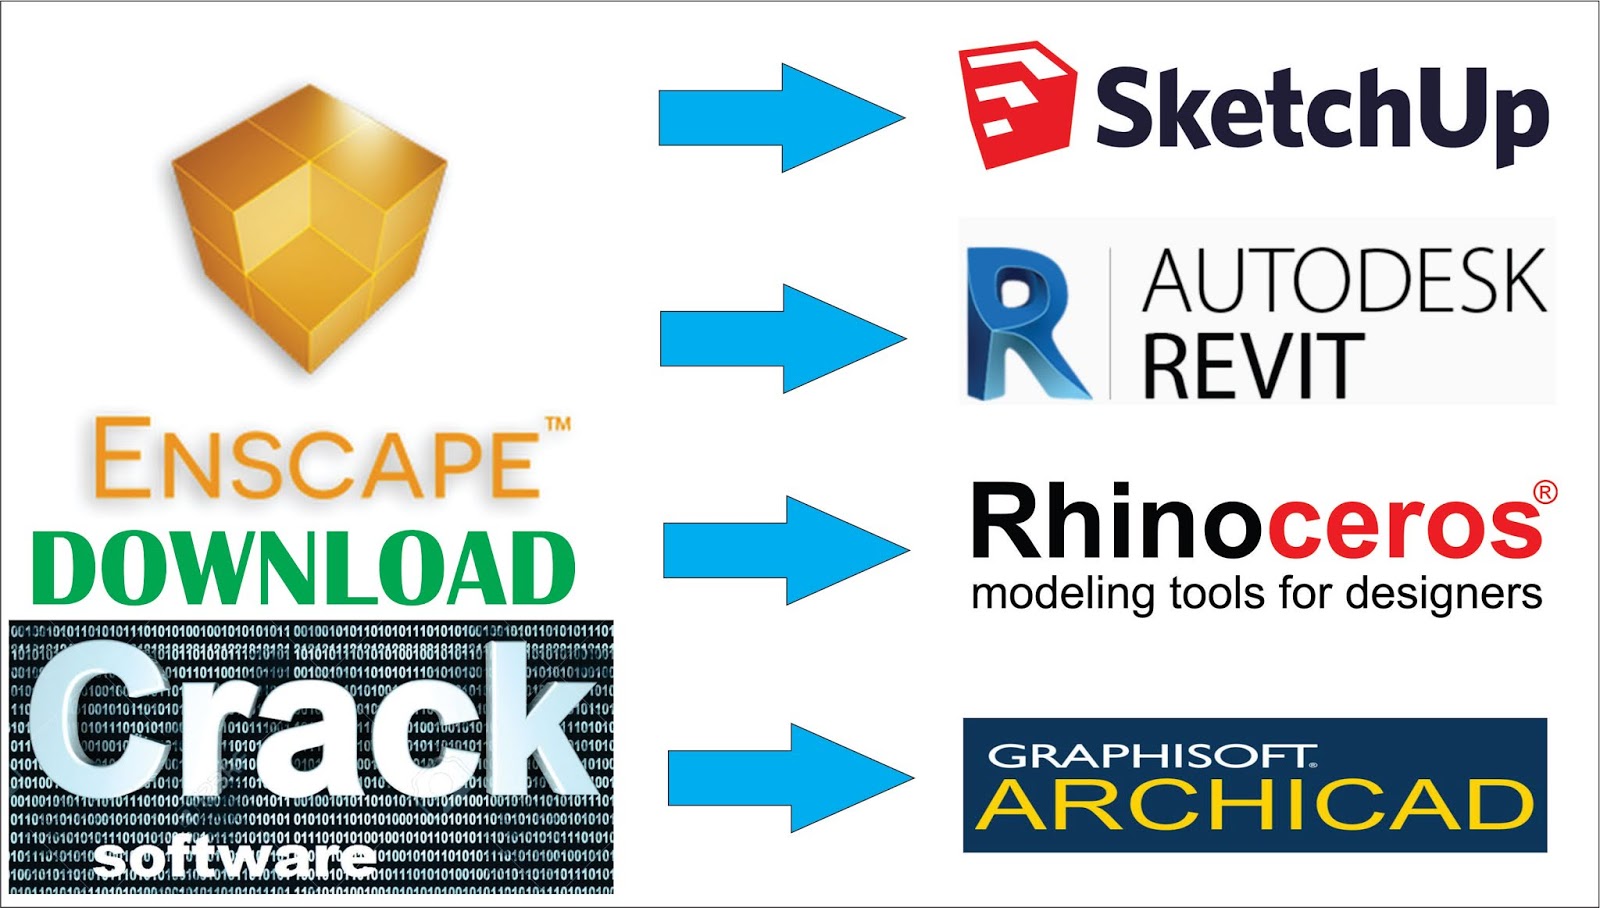 archicad 10 free download crack